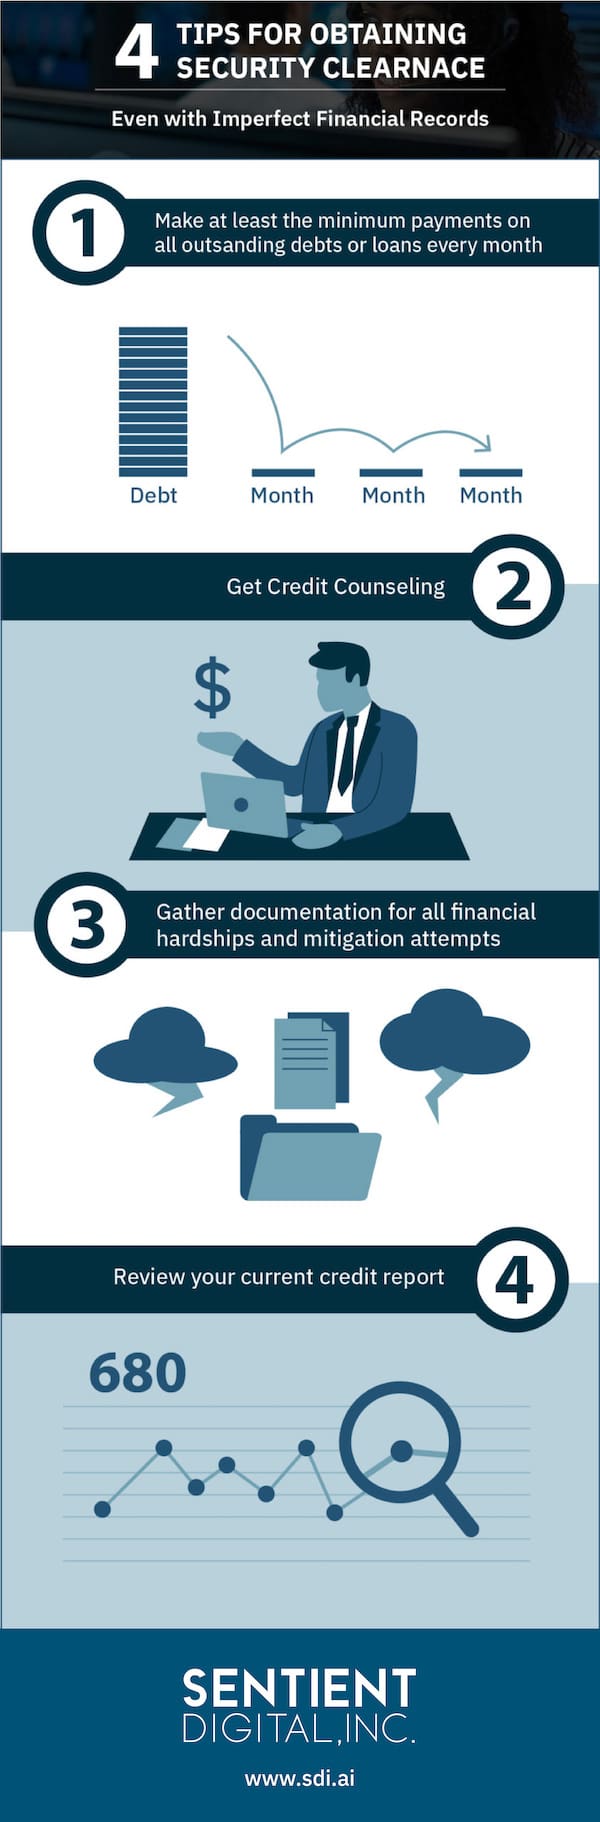 SDi graphic providing 4 tips for obtaining security clearance even with imperfect financial records